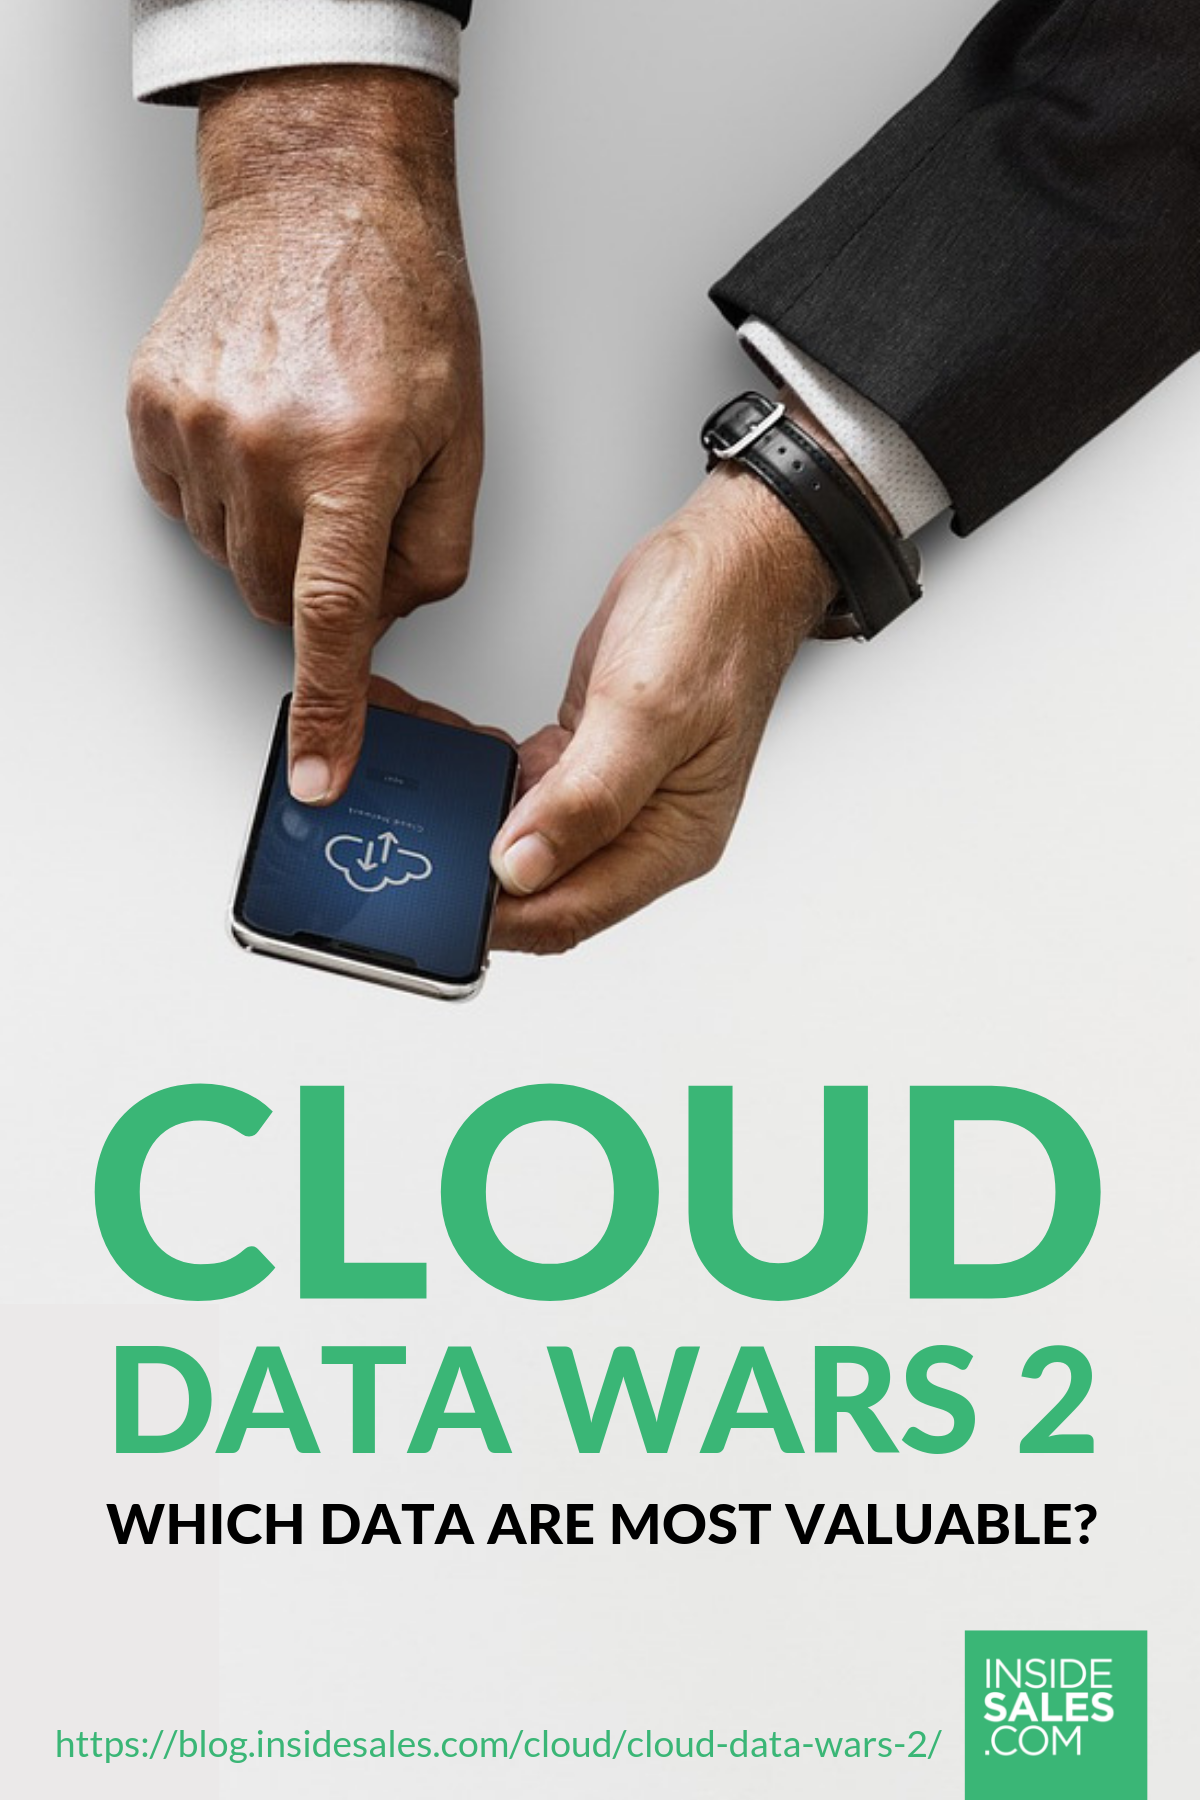 Cloud Data Wars 2:  Which Data are Most Valuable? https://www.insidesales.com/blog/cloud/cloud-data-wars-2/